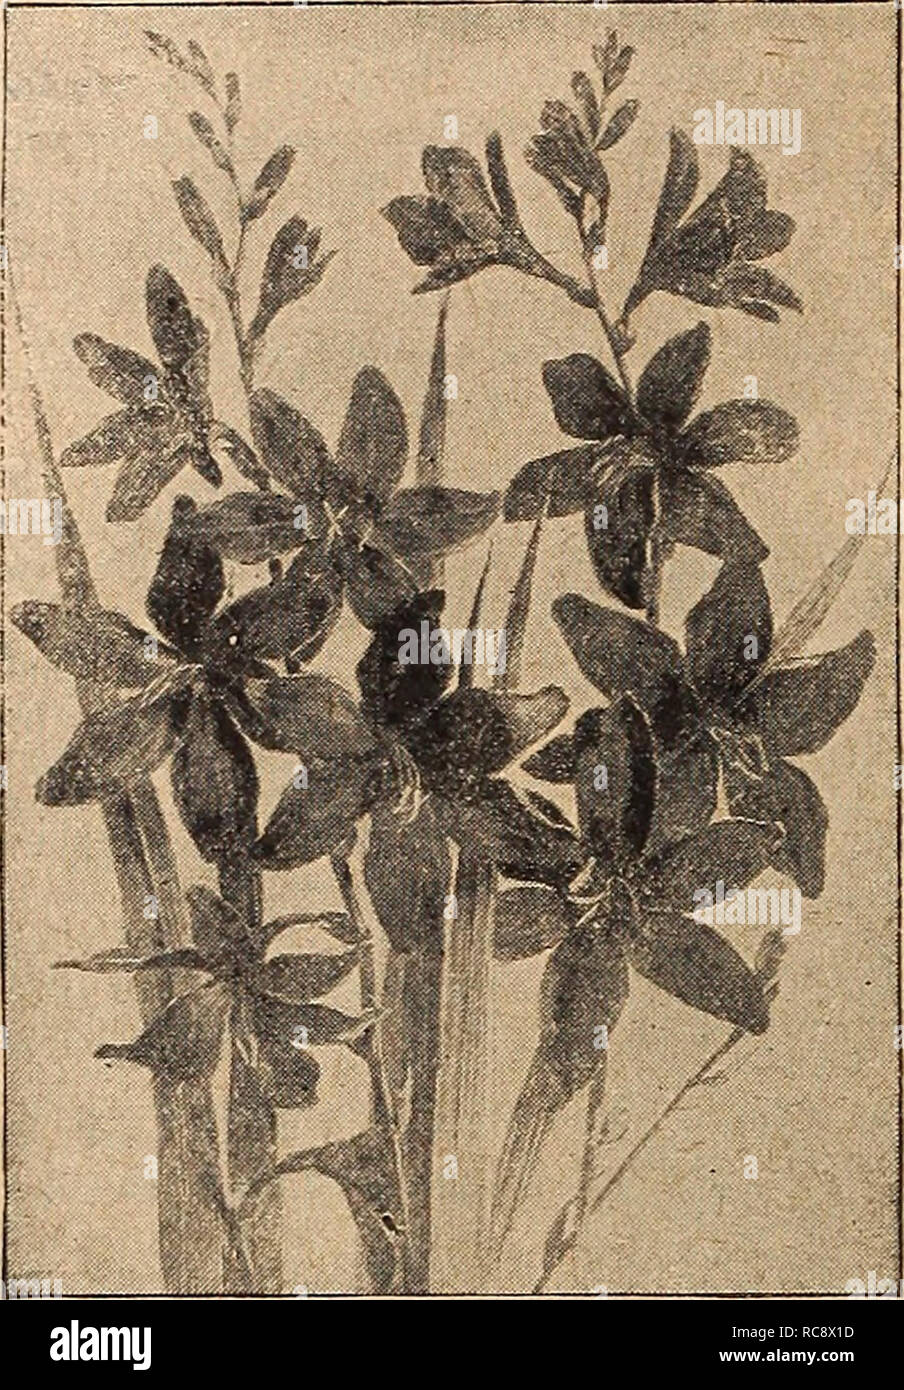 . Dreer's garden book 1920. Seeds Catalogs; Nursery stock Catalogs; Gardening Equipment and supplies Catalogs; Flowers Seeds Catalogs; Vegetables Seeds Catalogs; Fruit Seeds Catalogs. 186 DRHR-fflllADaPniA-M-BBf HARDY PERENNIAL PLANT!. MONTBRETIAS MARSHALLIA Trinervis. A useful plant for a shady, damp spot, of neat habit, about 15 inches high, bearing freely from June to August heads of white flowers, tinted flesh. 25 cts. each; $2.50 per doz. MERTENSIA (BiueBeiu) Virginlca. An early spring-flowering plant, growing about 1 to lj feet high, with droop- ing panicles of handsome light blue flower Stock Photo